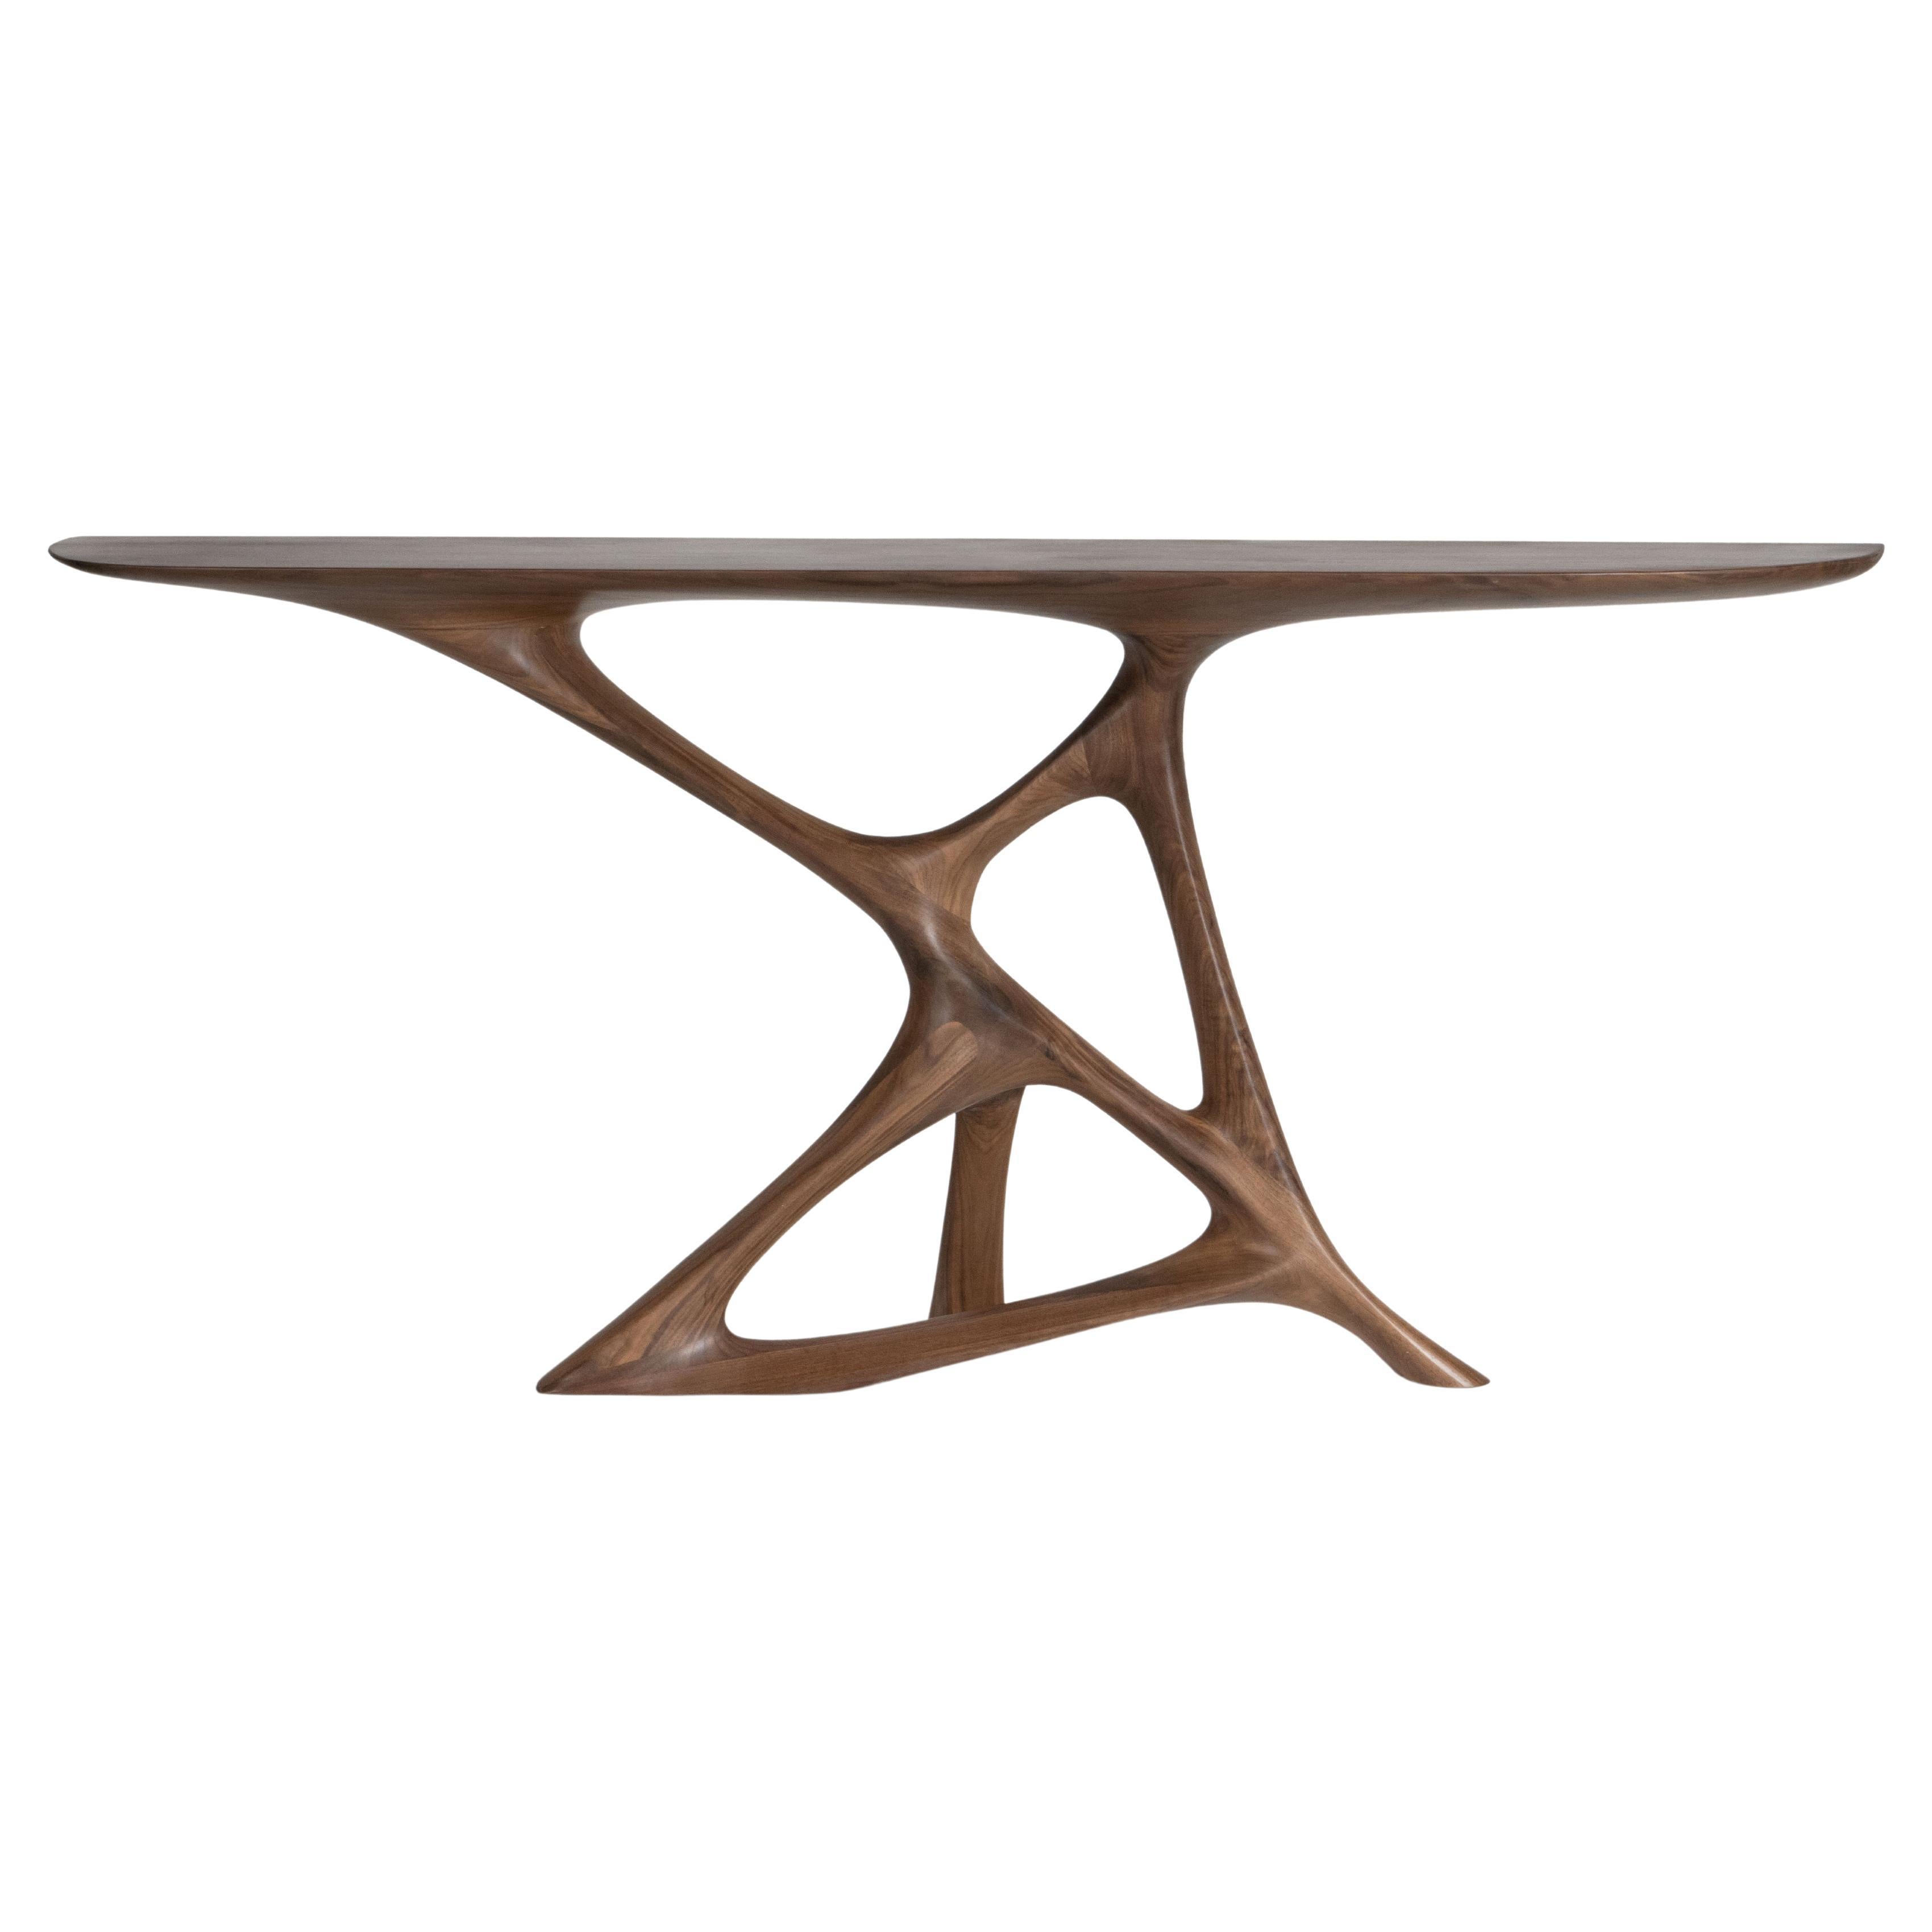 Amorph Anika Console table in Natural stain on Walnut wood